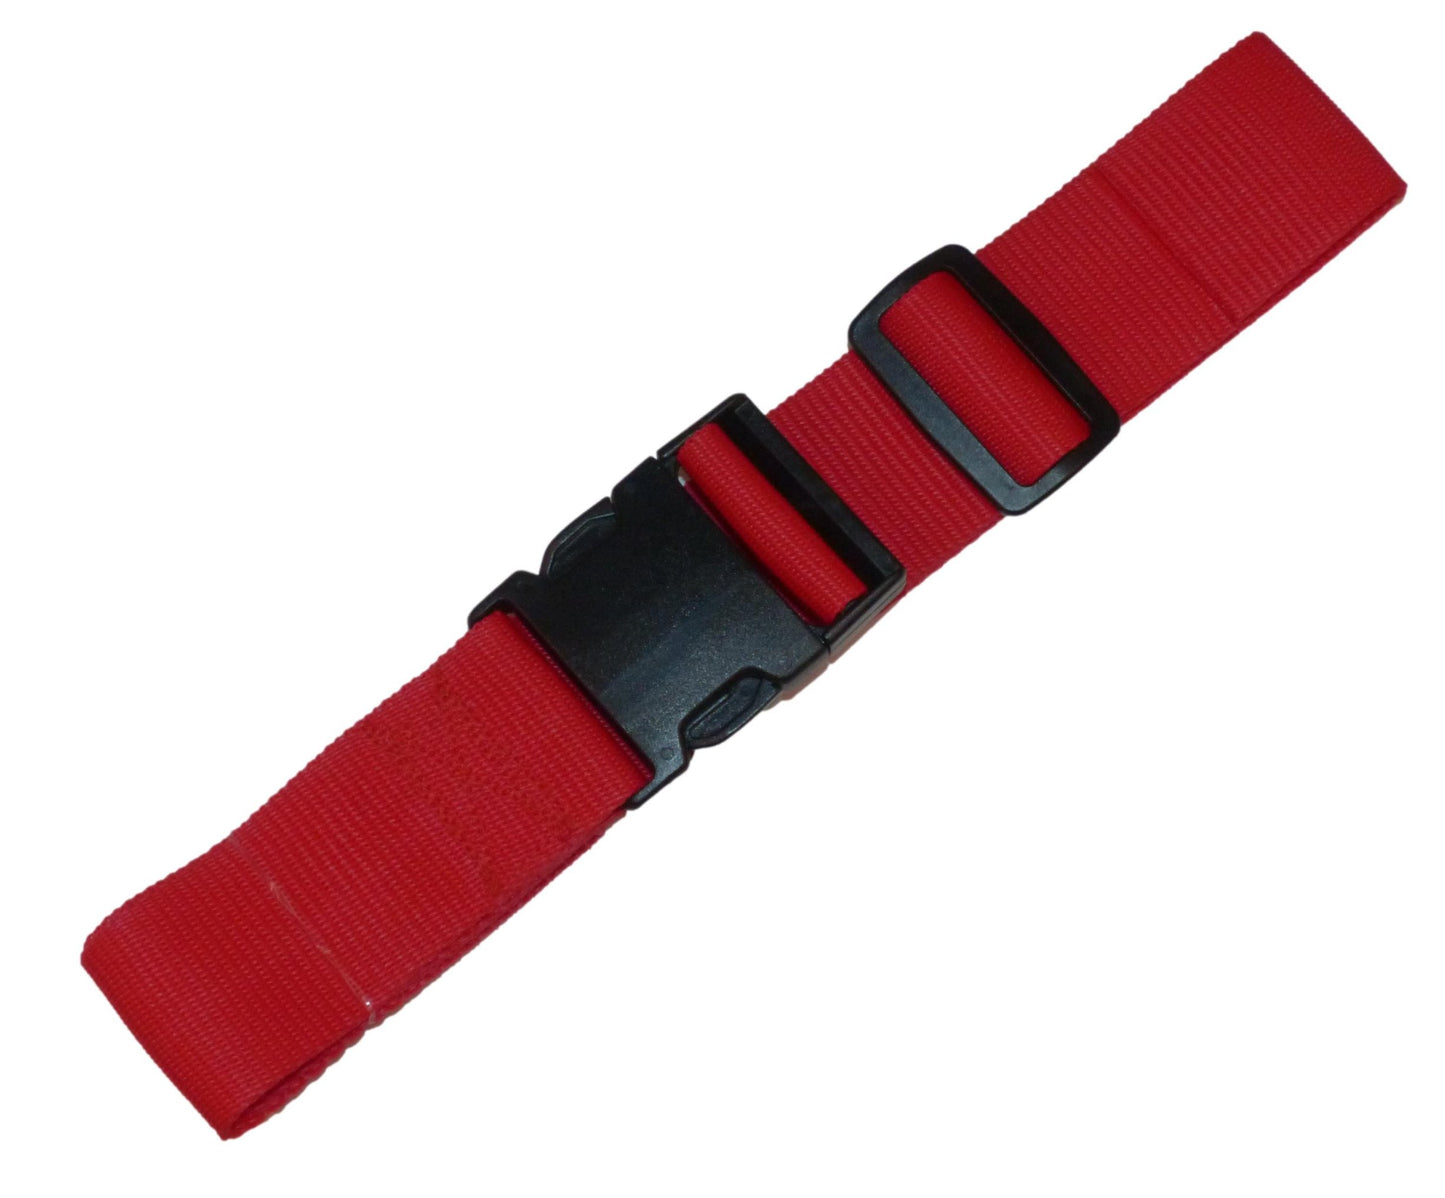 Benristraps 50mm Webbing Strap with Quick Release Buckle in red